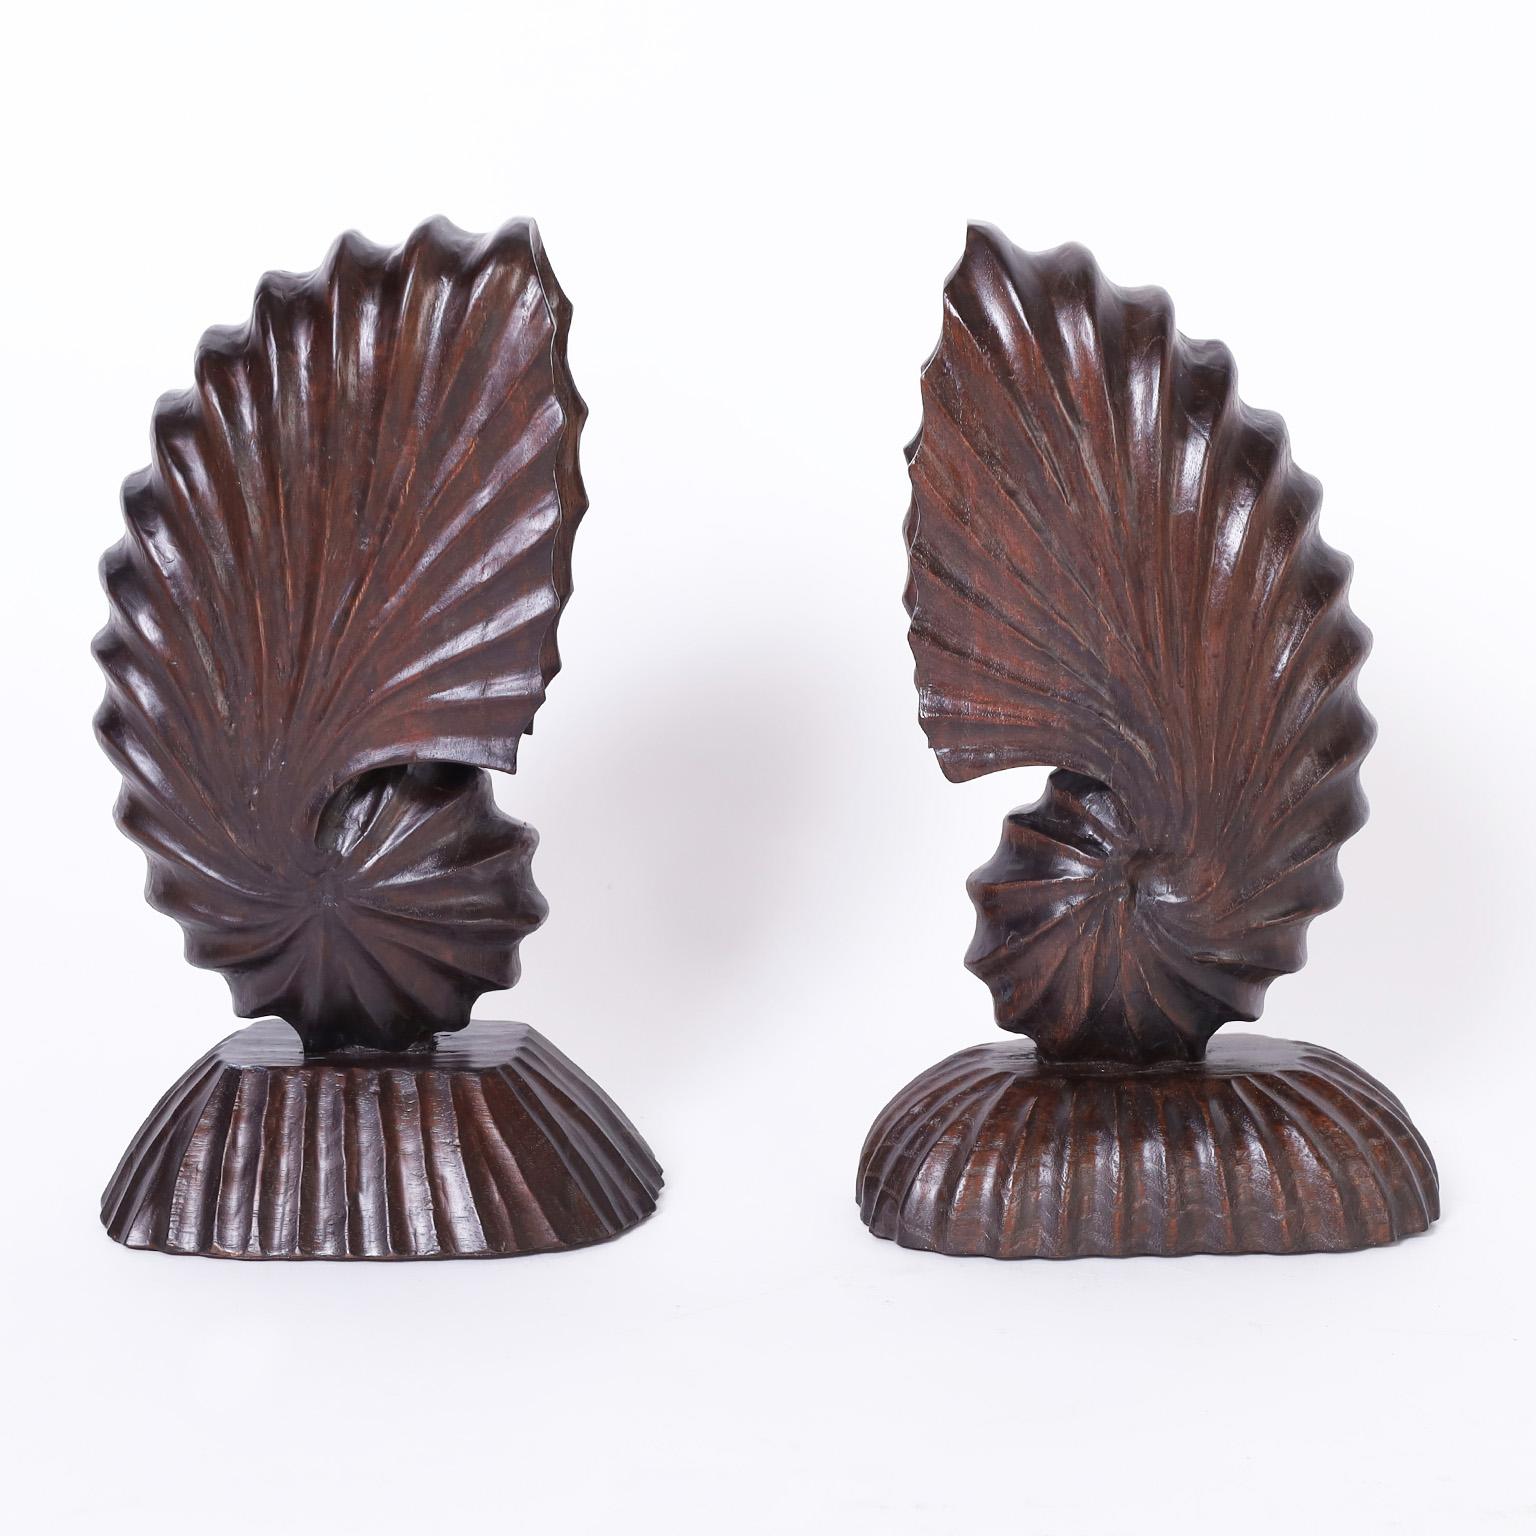 Pair of Carved Wood Nautilus Shells - Sculpture by Unknown